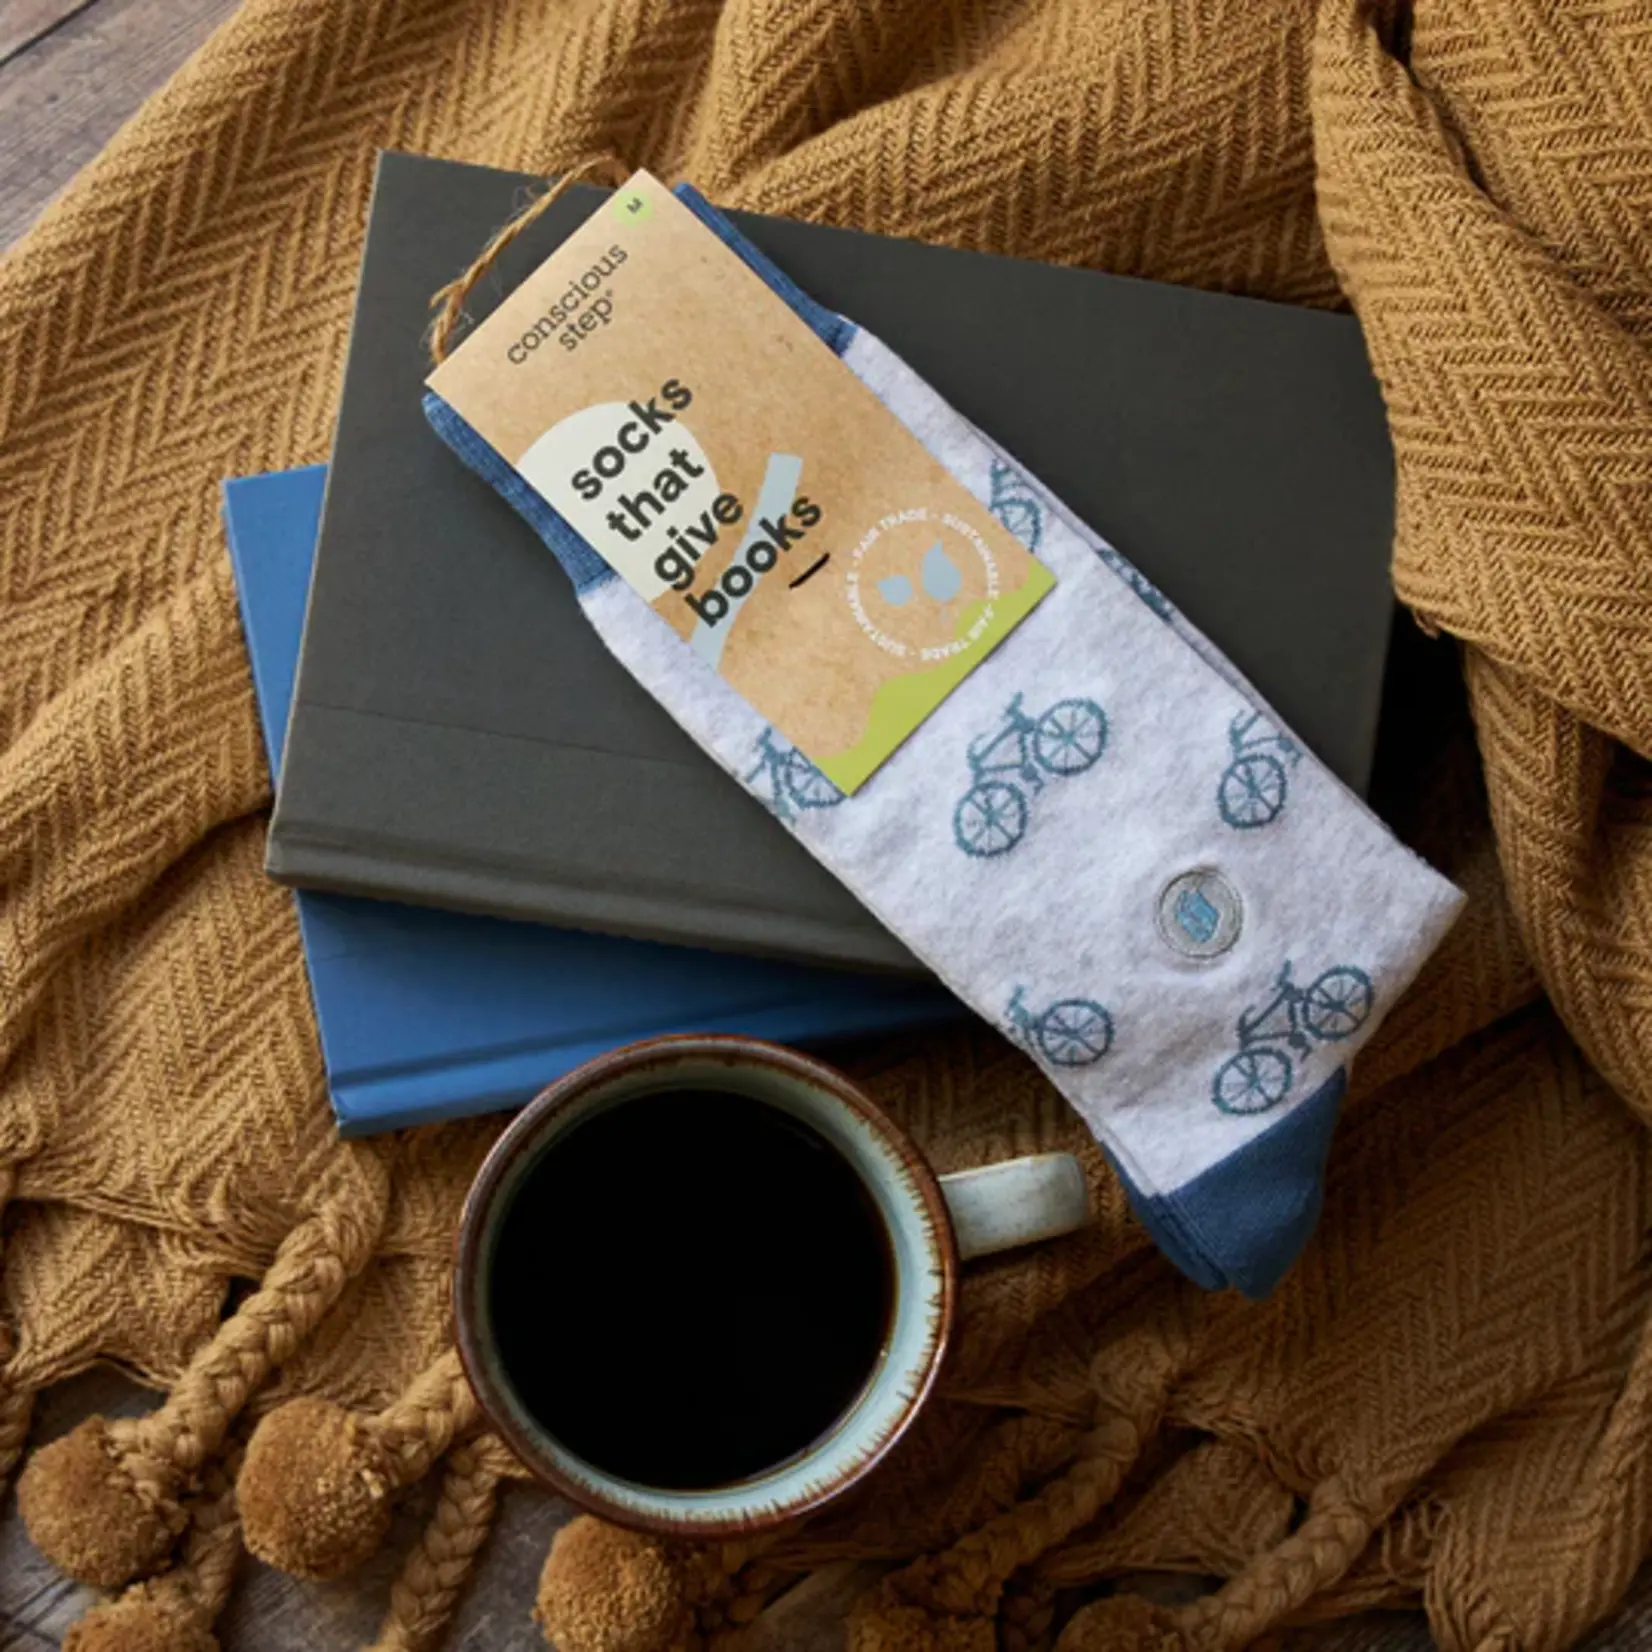 Conscious Step Socks that Give Books | Small | Grey